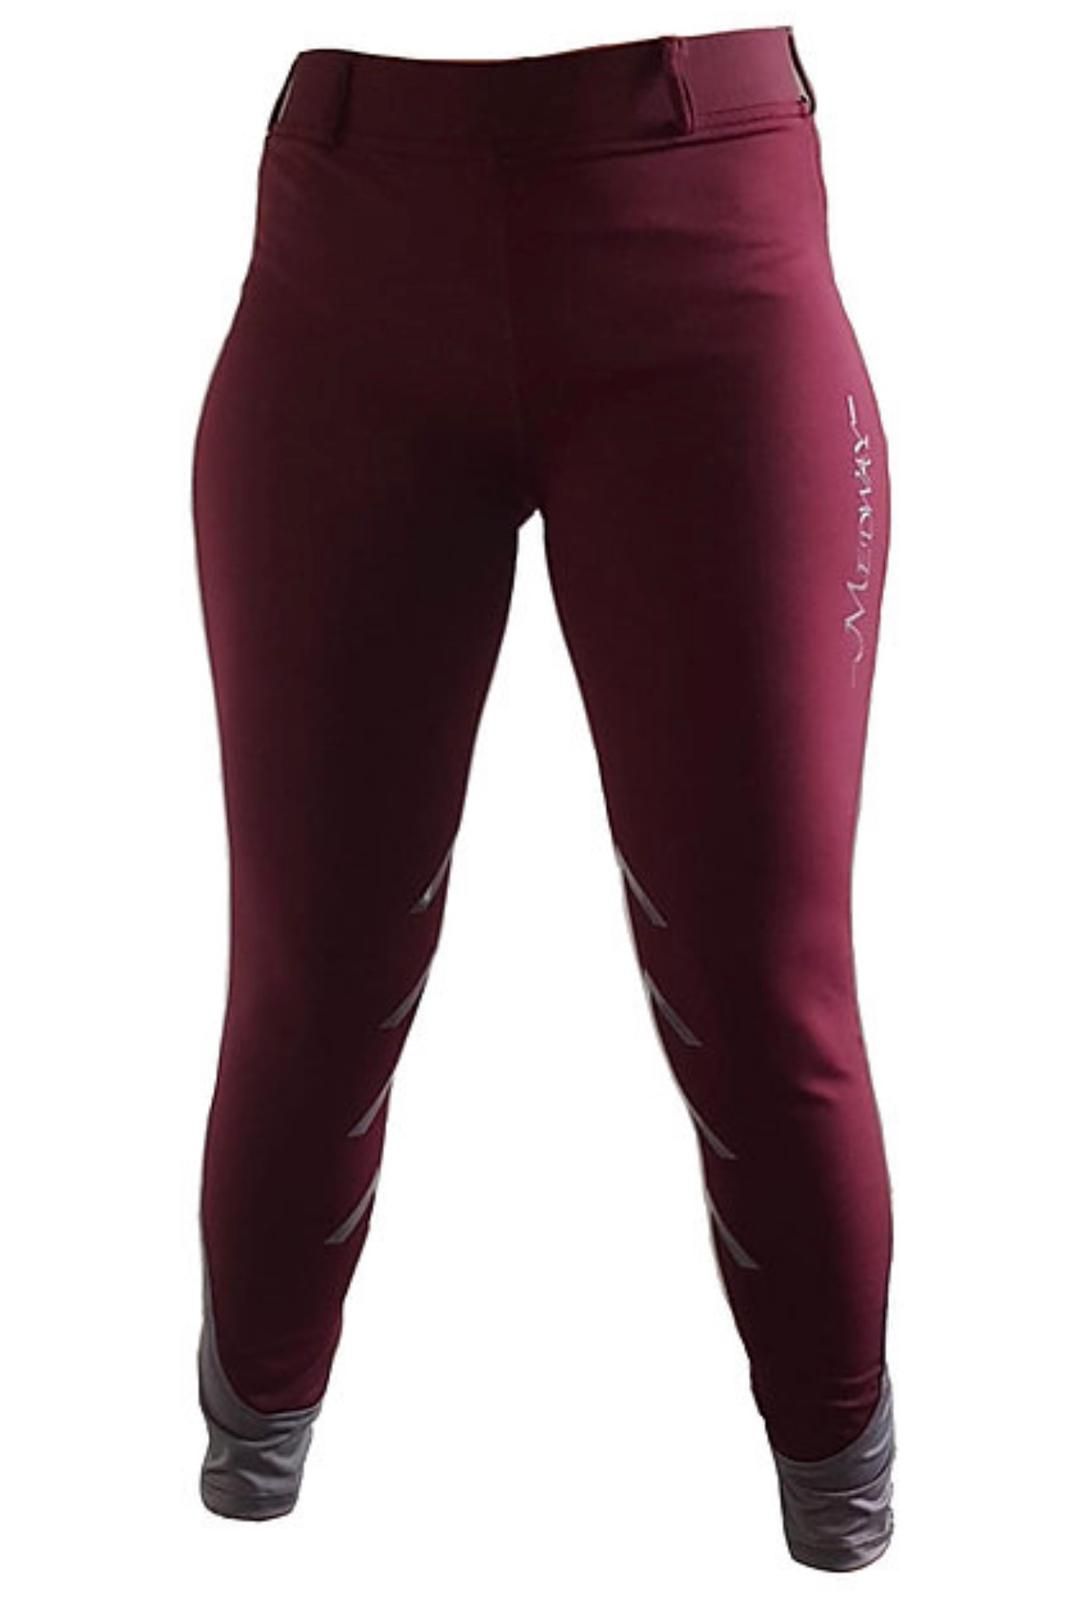 Riding Tights, Plum and Grey